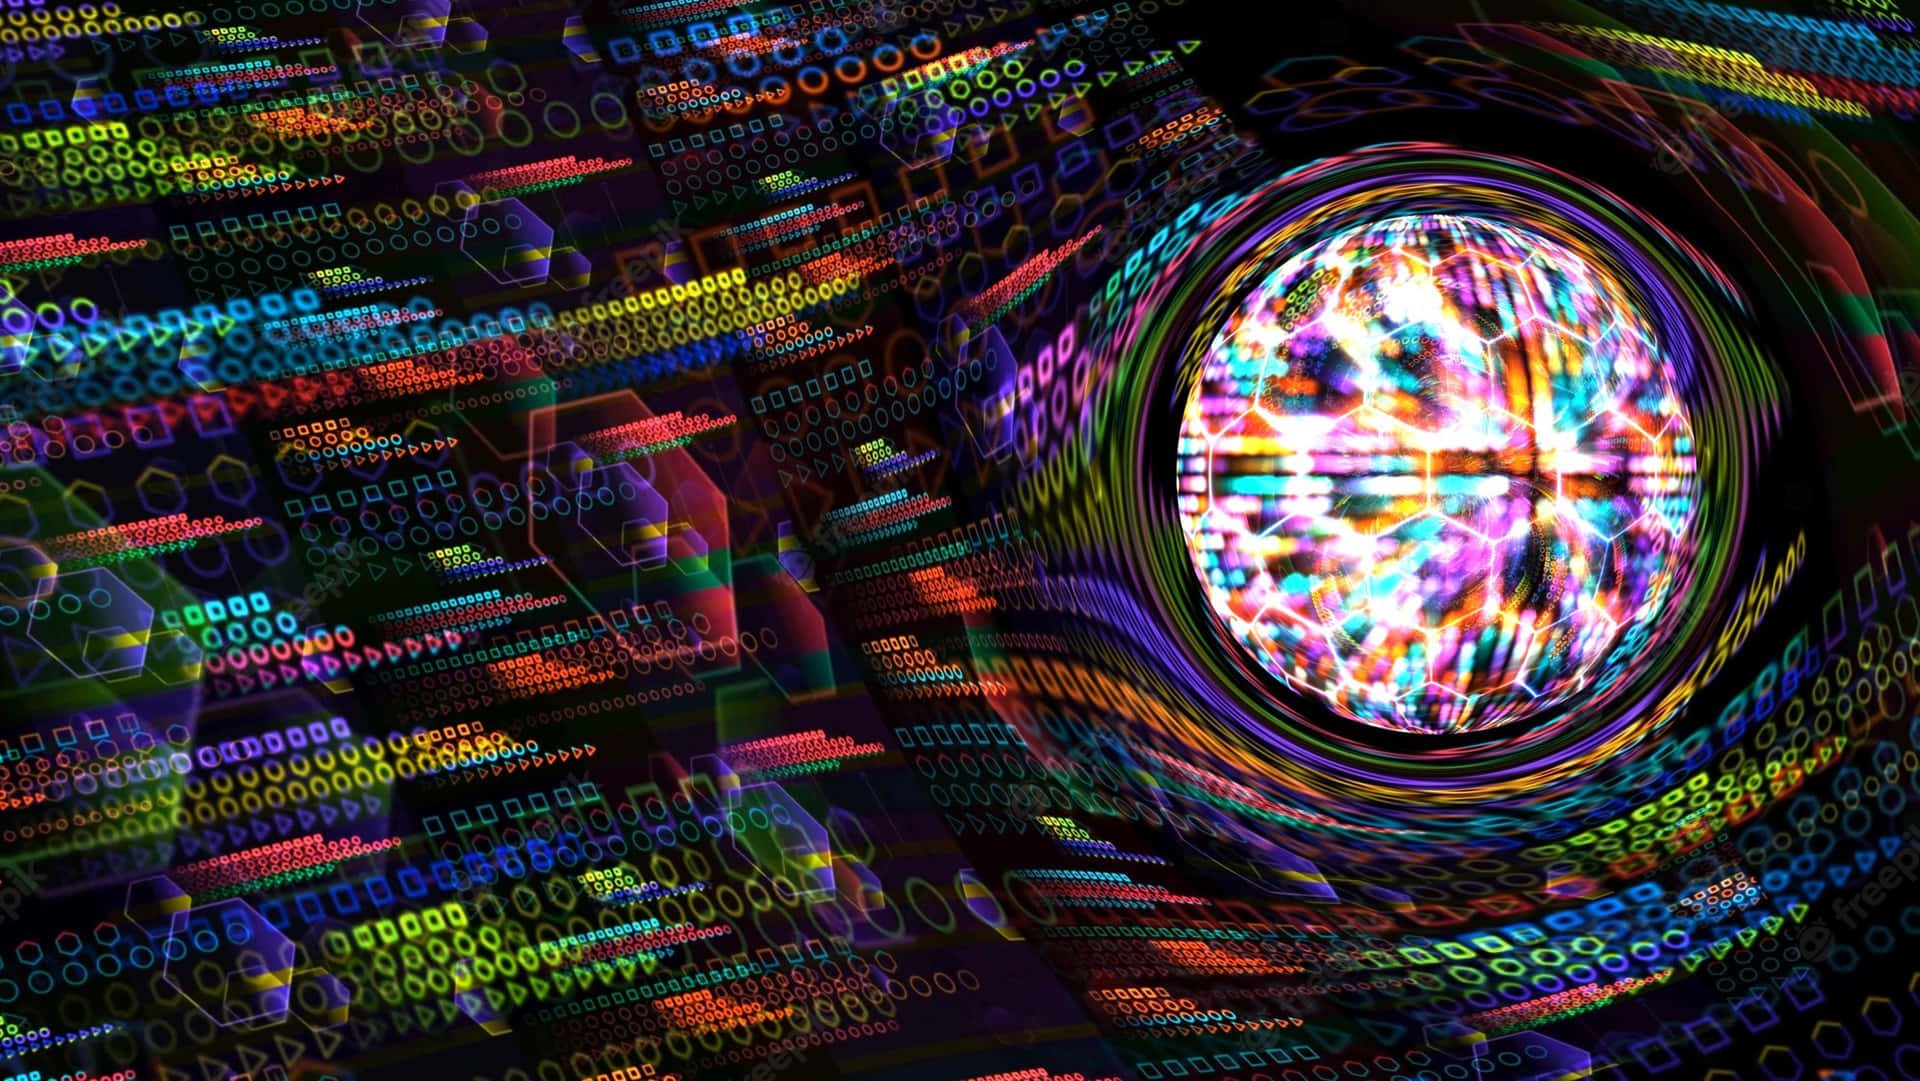 A kaleidoscope of rapidly changing visuals and emotions evoked during an intense DMT experience Wallpaper